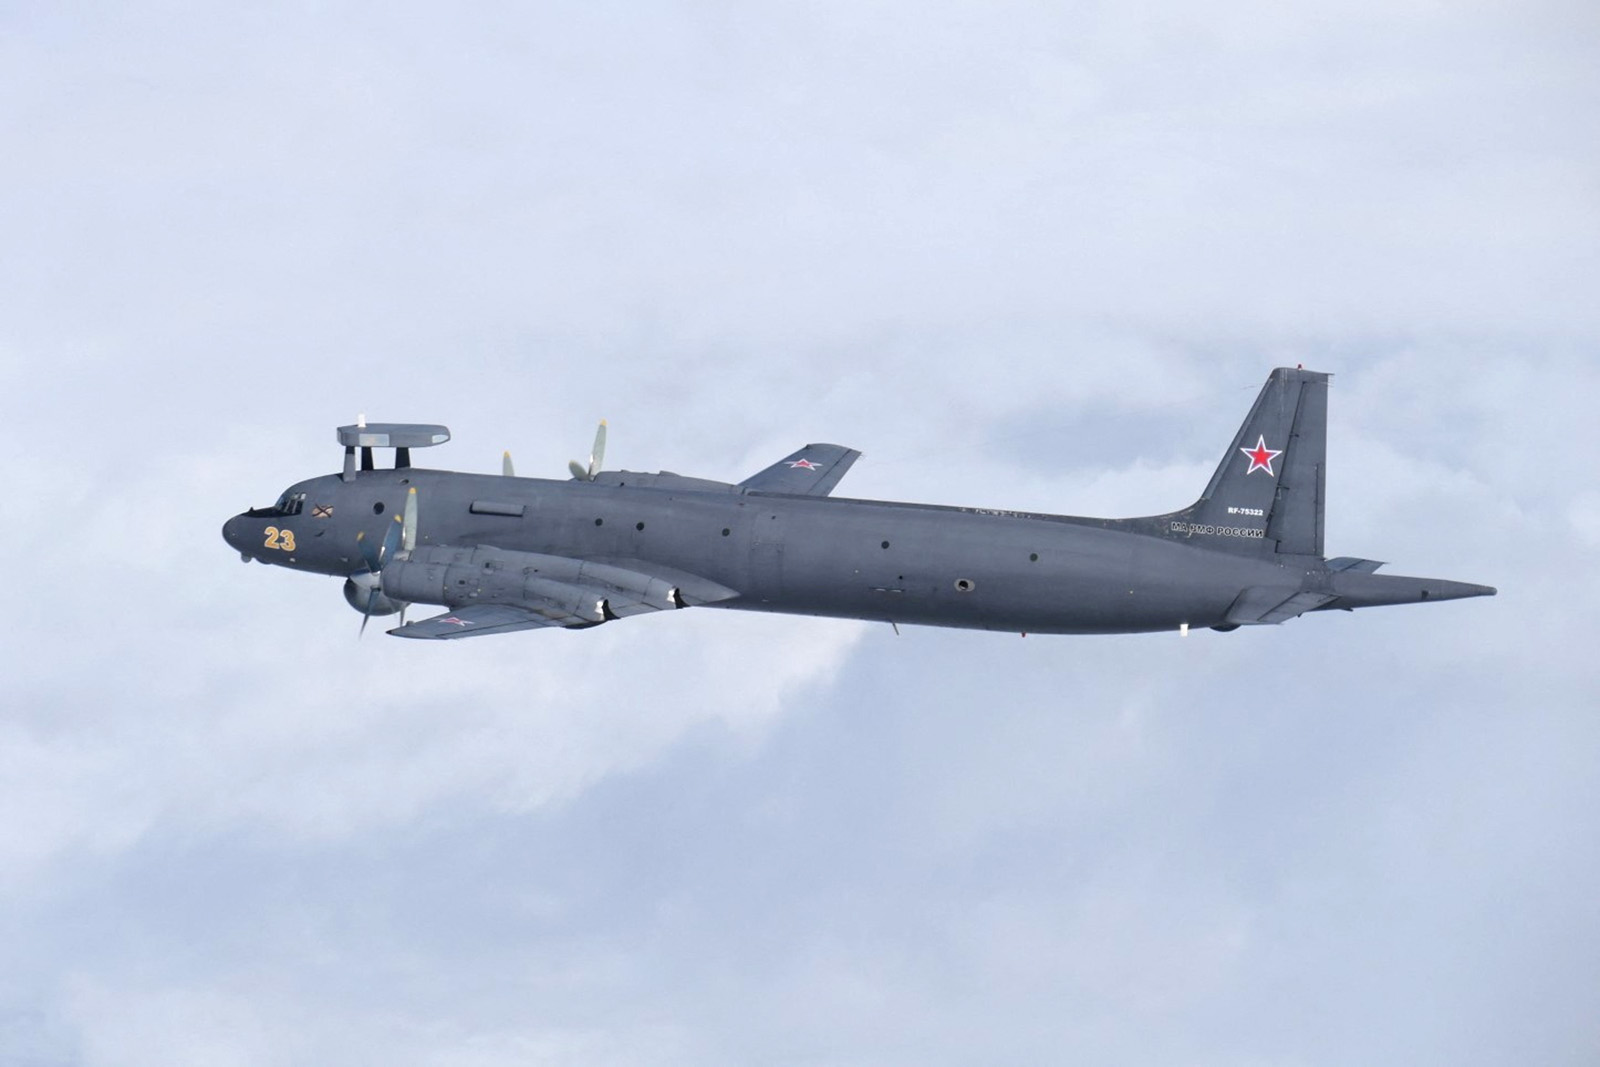 A Russian IL-38 information-gathering aircraft flies between the Sea of Japan and the East China Sea, in this photo taken by Japan Air Self-Defense Force August 18.